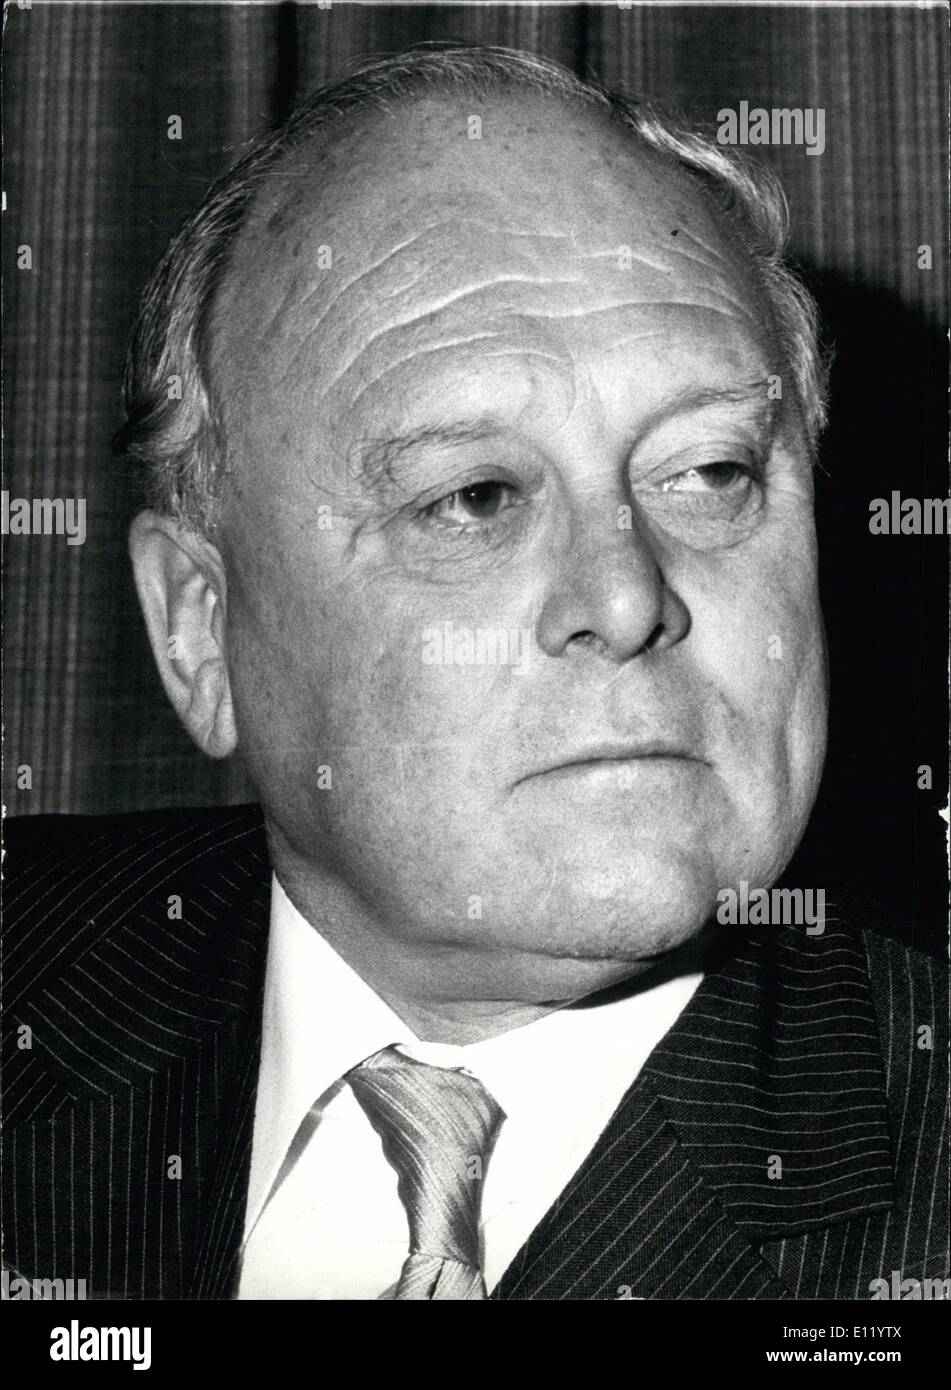 Apr. 04, 1981 - New Ambassador to Beirut: Mr. David Roberts CMG CVO has been appointed to be HM Ambassador to the Lebanese Republic in succession to Mr. B.L. Strachen CMG wt will be taking up another appointment. Photo shows Mr. D.A. Roberts, newly-appointed Ambassador to Lebanon. Stock Photo